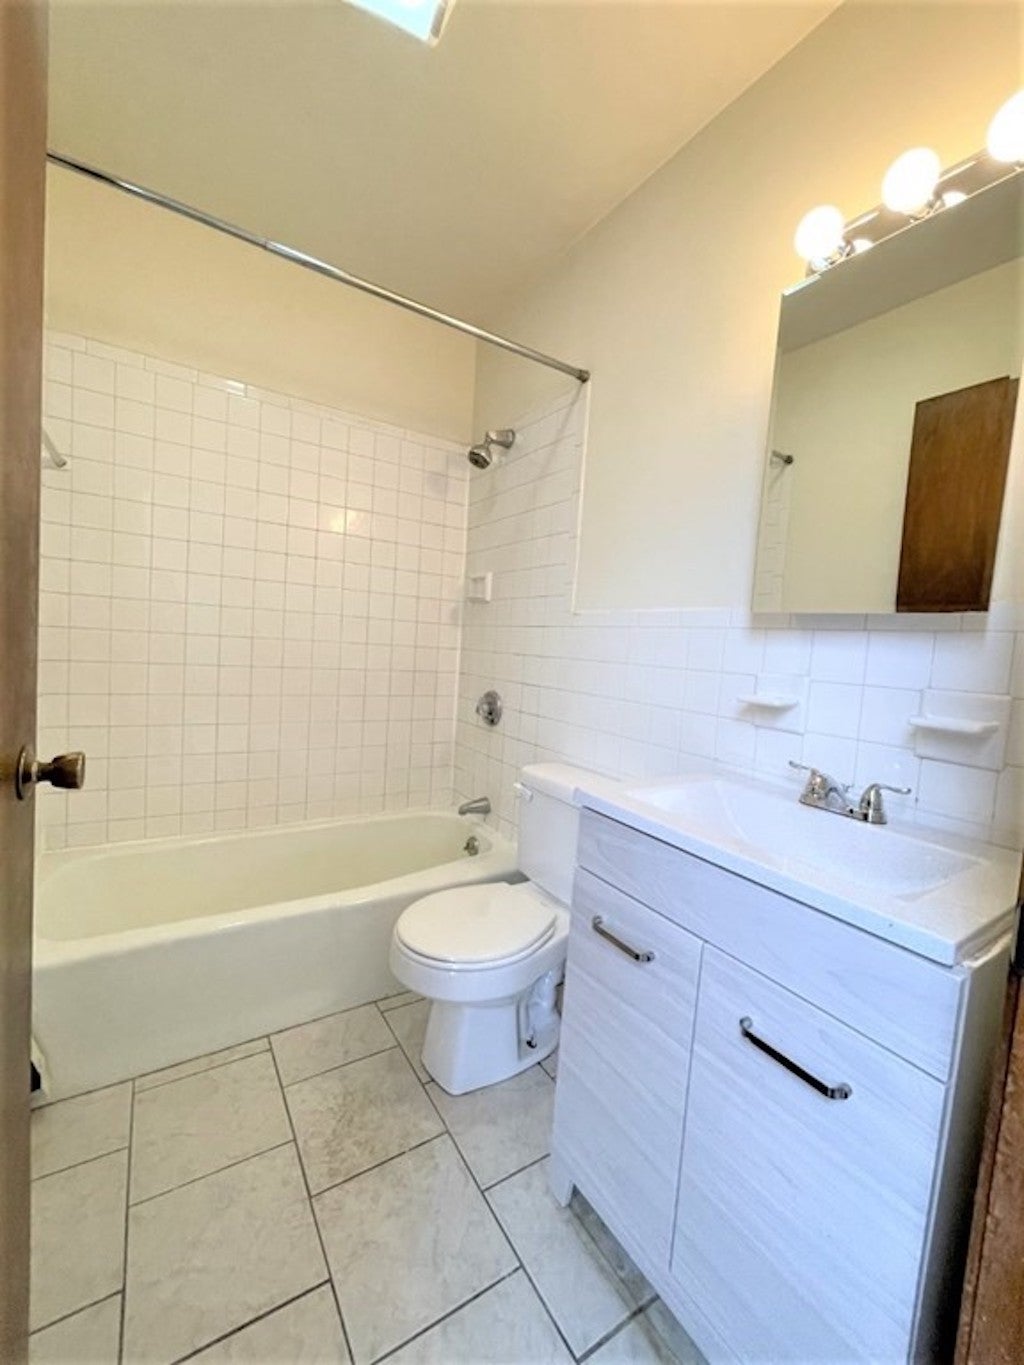 The bathroom has a tile floor, white walls and a white ceiling. There's a single-sink vanity with white cabinets underneath. There's a small mirror with three spotlights overhead. The shower-tub combo takes up the space a the back of room.